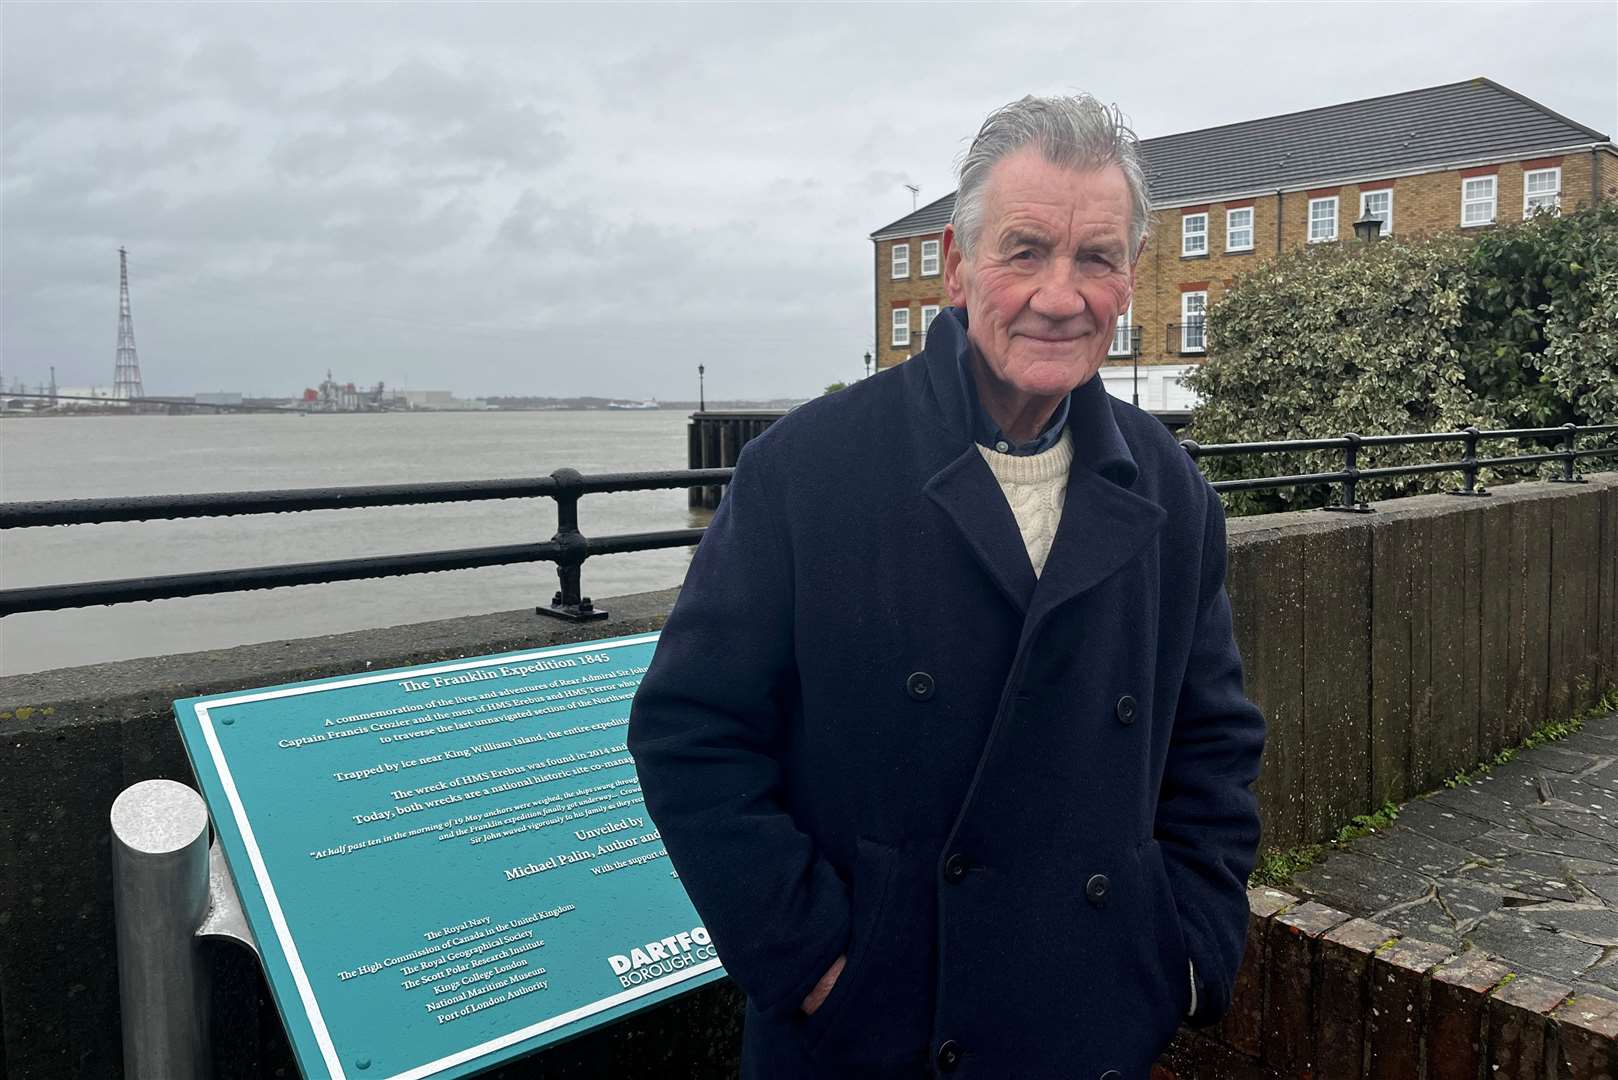 Sir Michael Palin unveilved a plaque to honour the 1845 Franklin Expedition